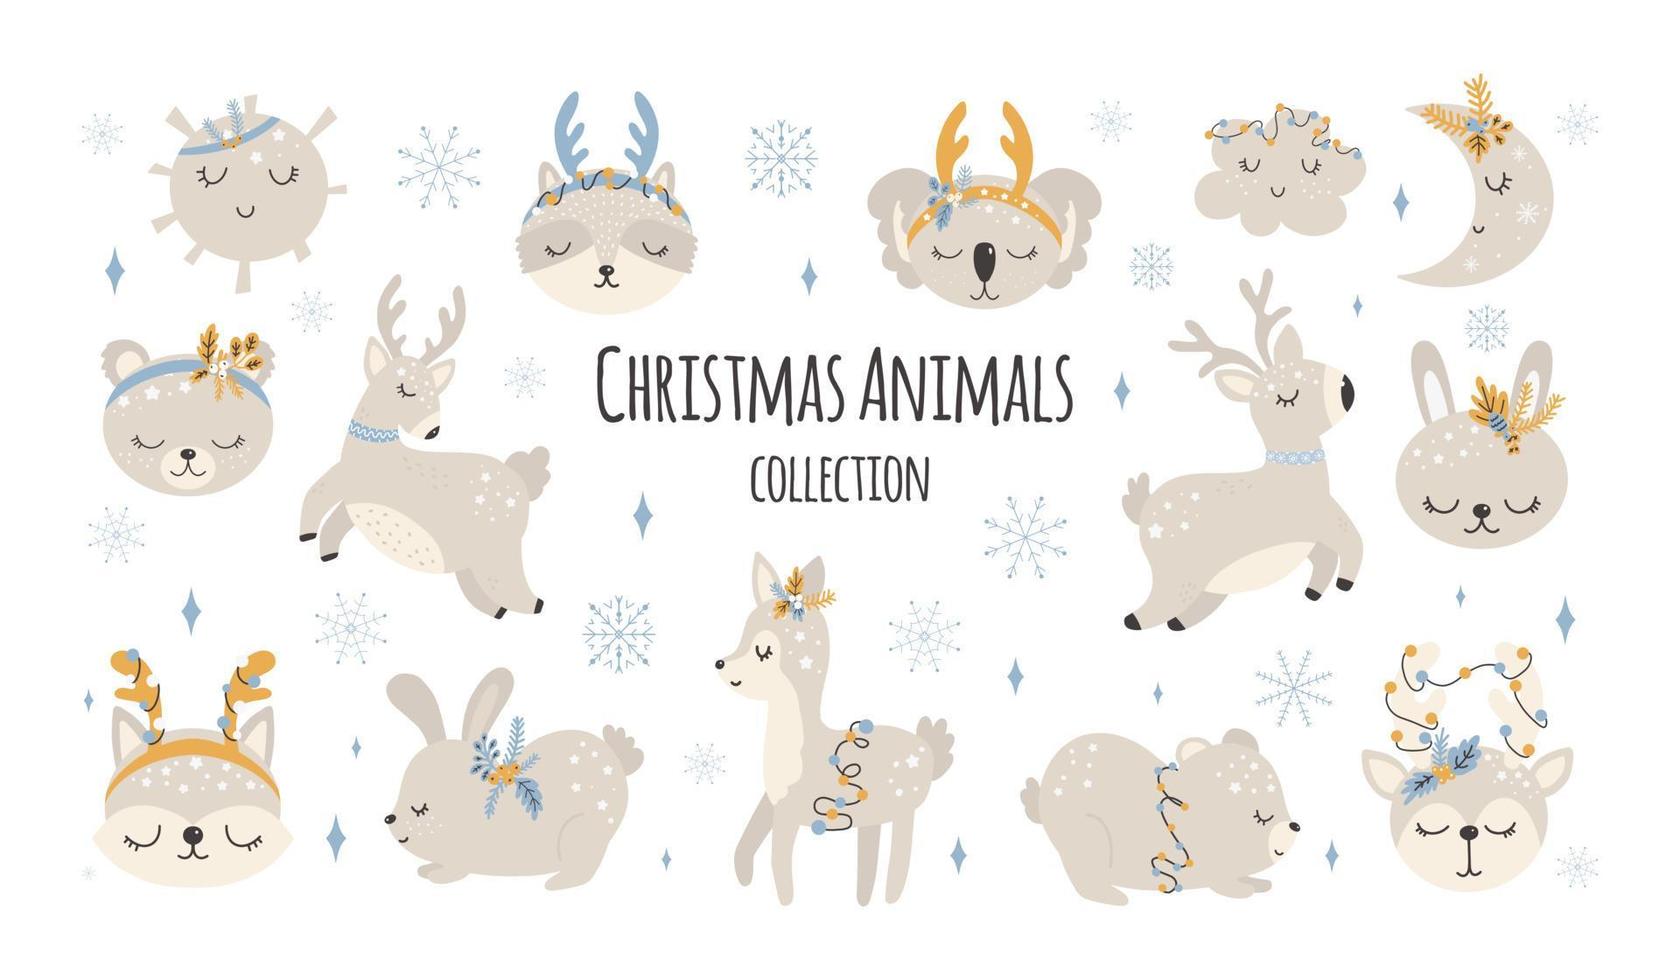 Collection of Christmas cute animals, merry Christmas illustrations of bear, bunny with winter accessories. Scandinavian style on a white background. vector